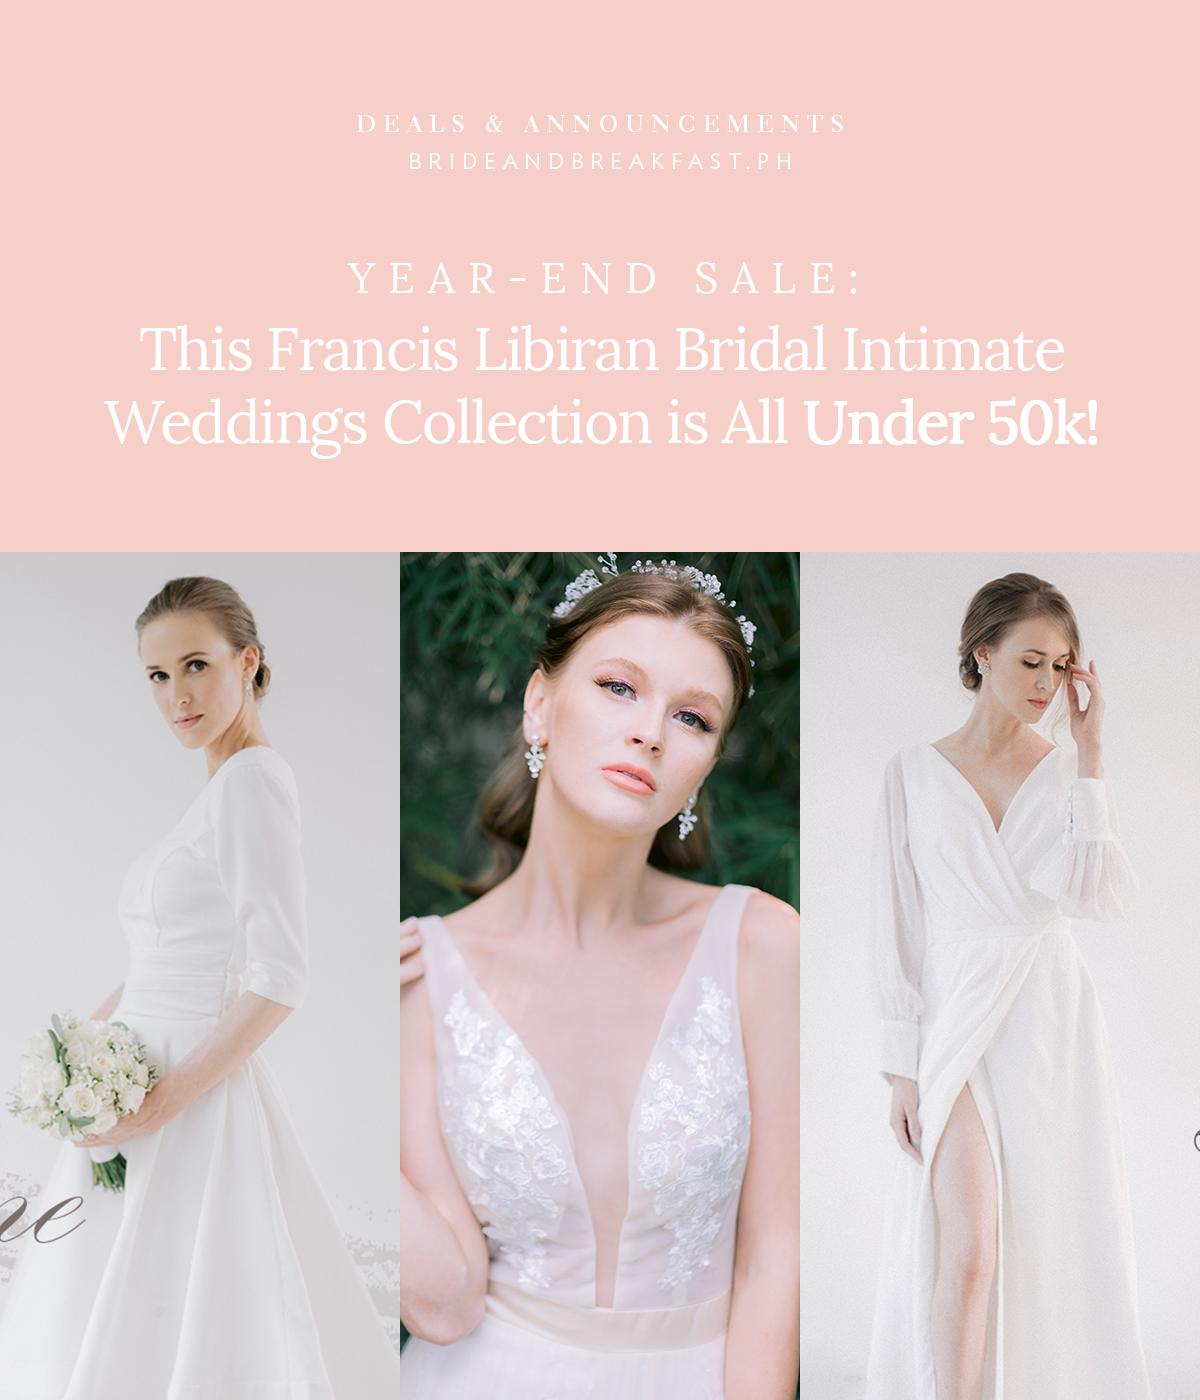 Year-End Sale: This Francis Libiran Bridal Intimate Weddings Collection is All Under 50k!